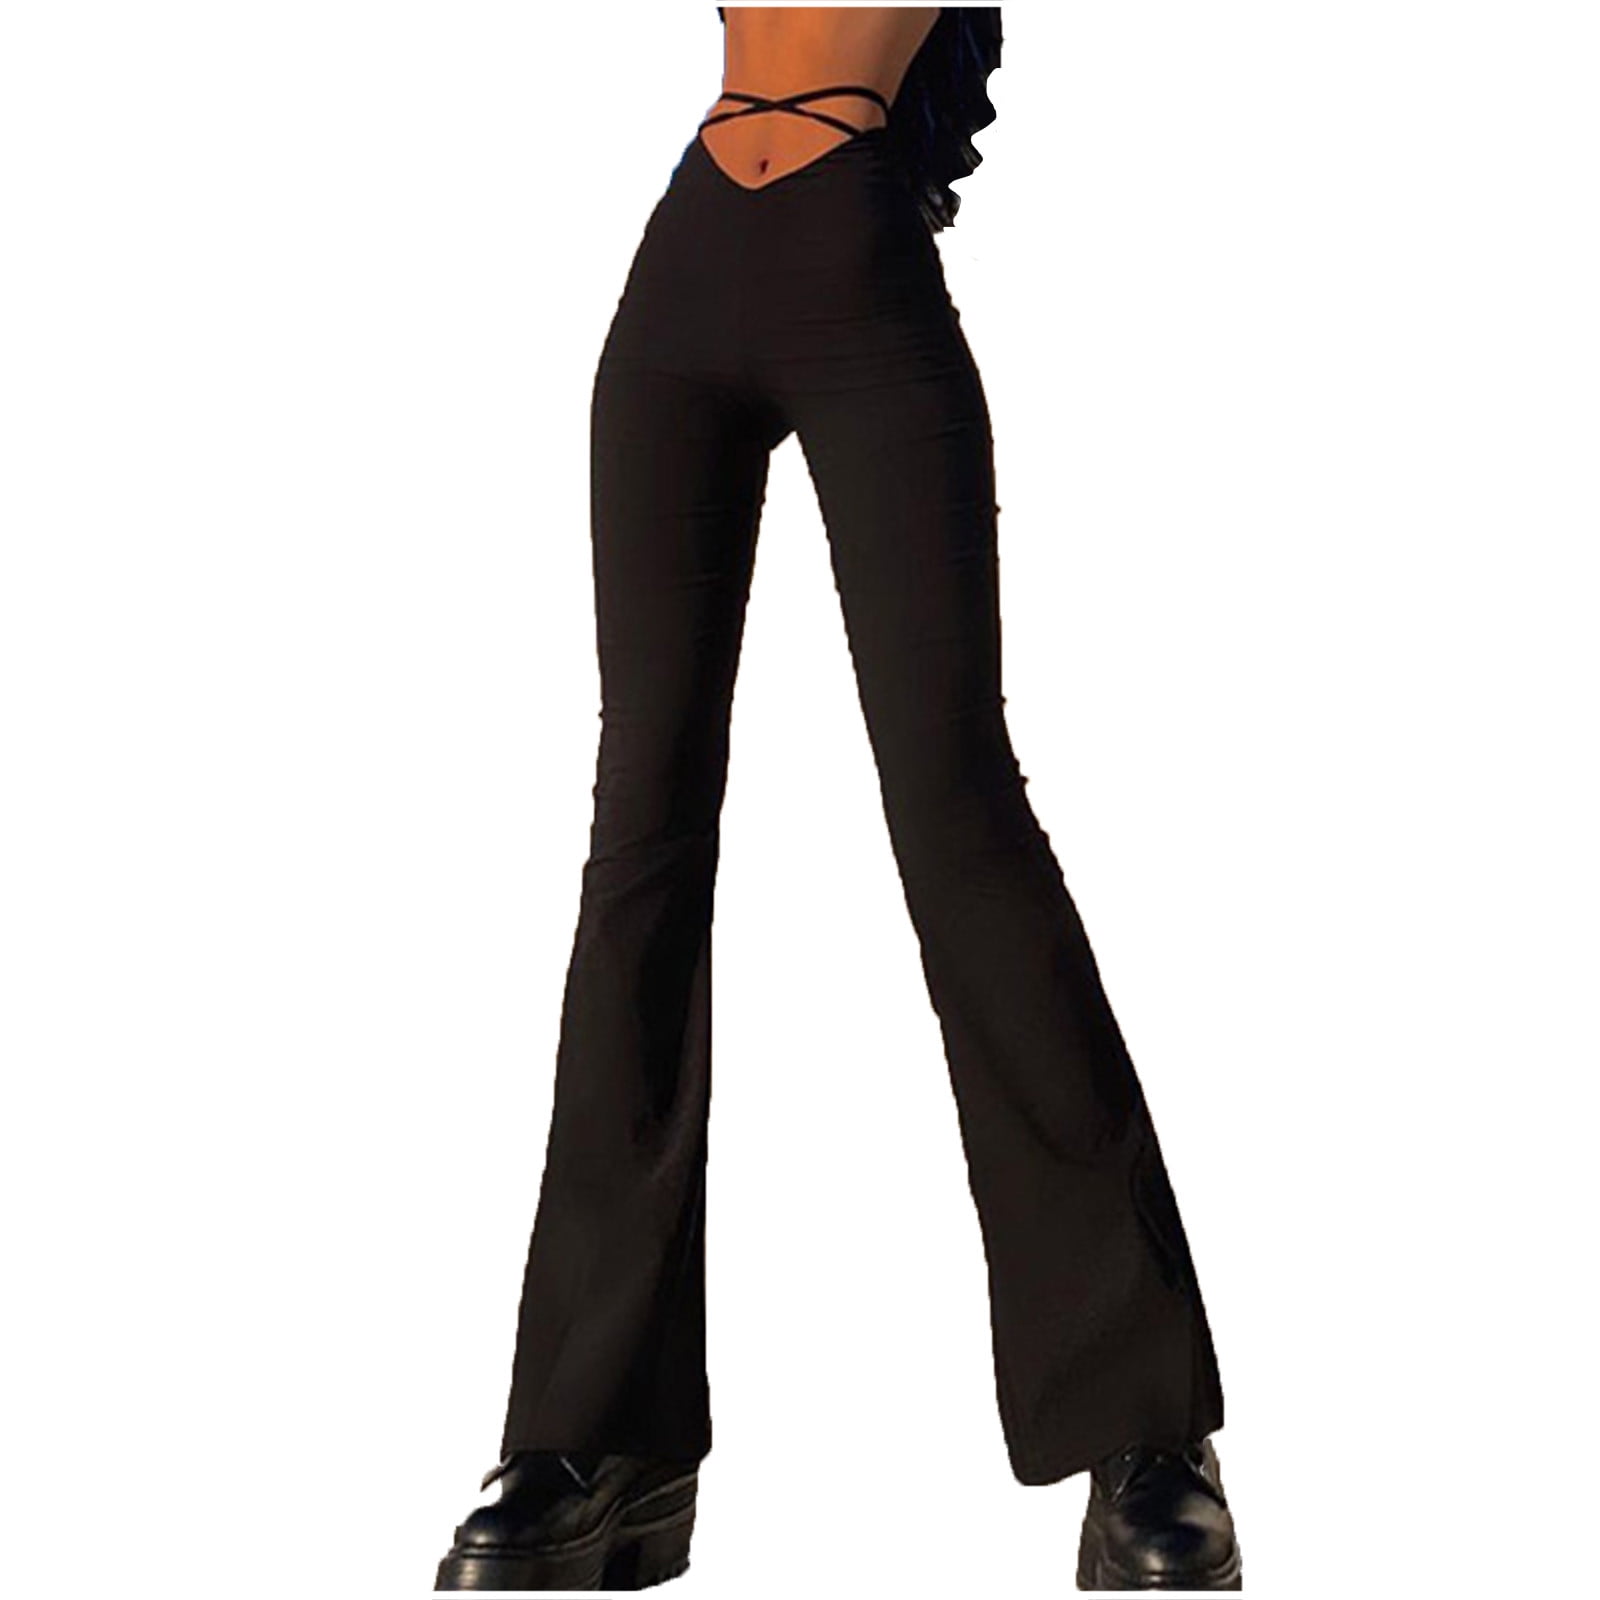 YYDGH Women's Cut Out Flare Pants V-Waisted Cropped Cross Elastic Stretch  Bell Bottom Trousers Solid Flared Lounge Pants Black S 